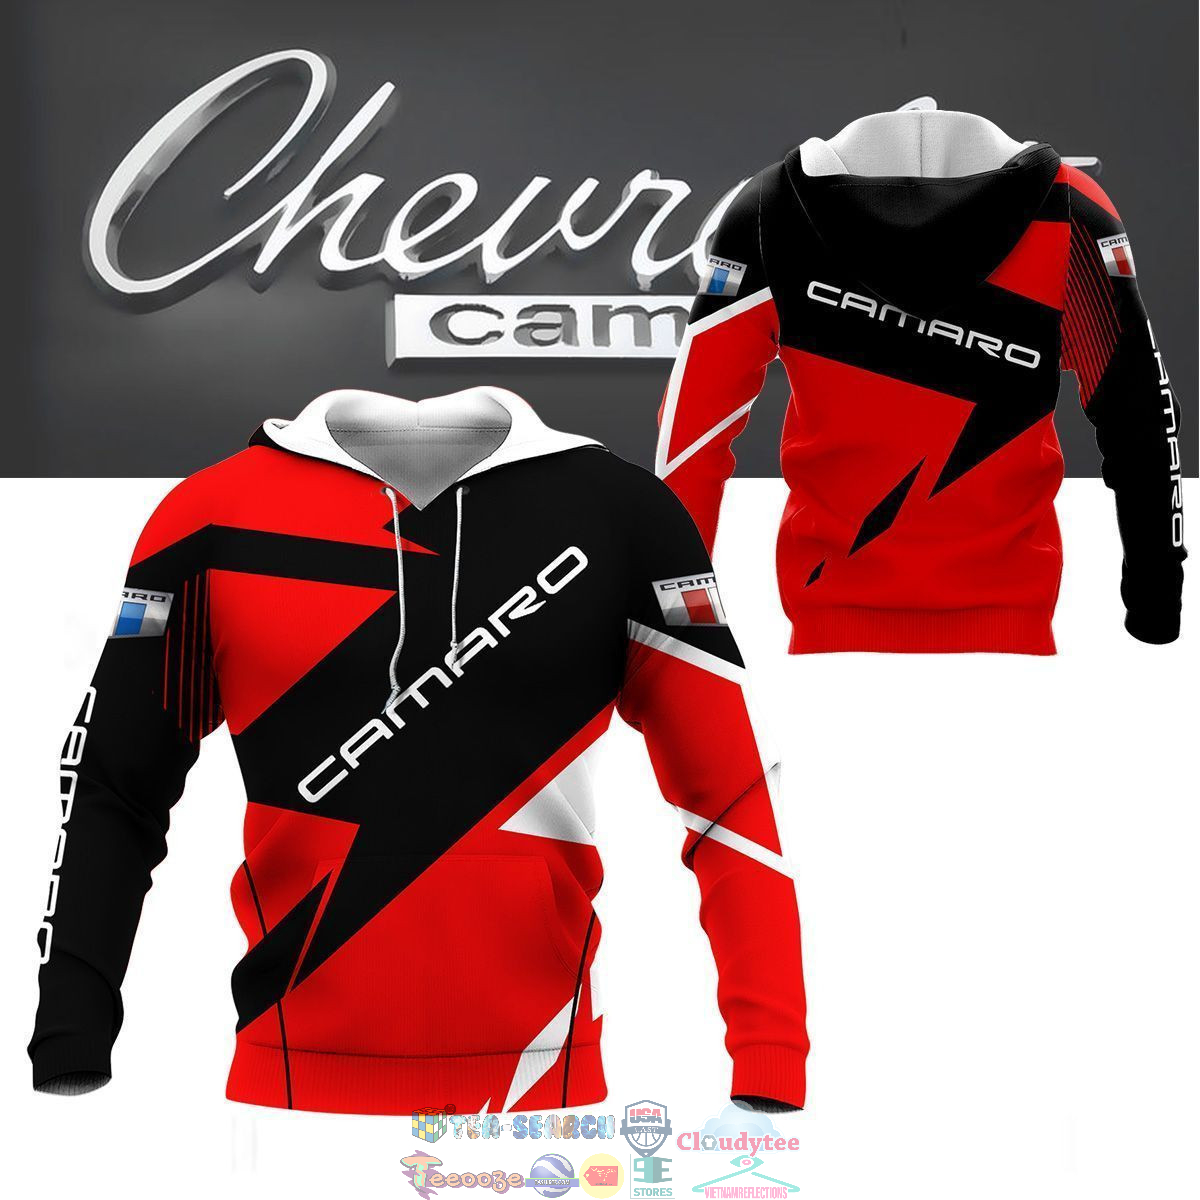 Chevrolet Camaro ver 13 3D hoodie and t-shirt